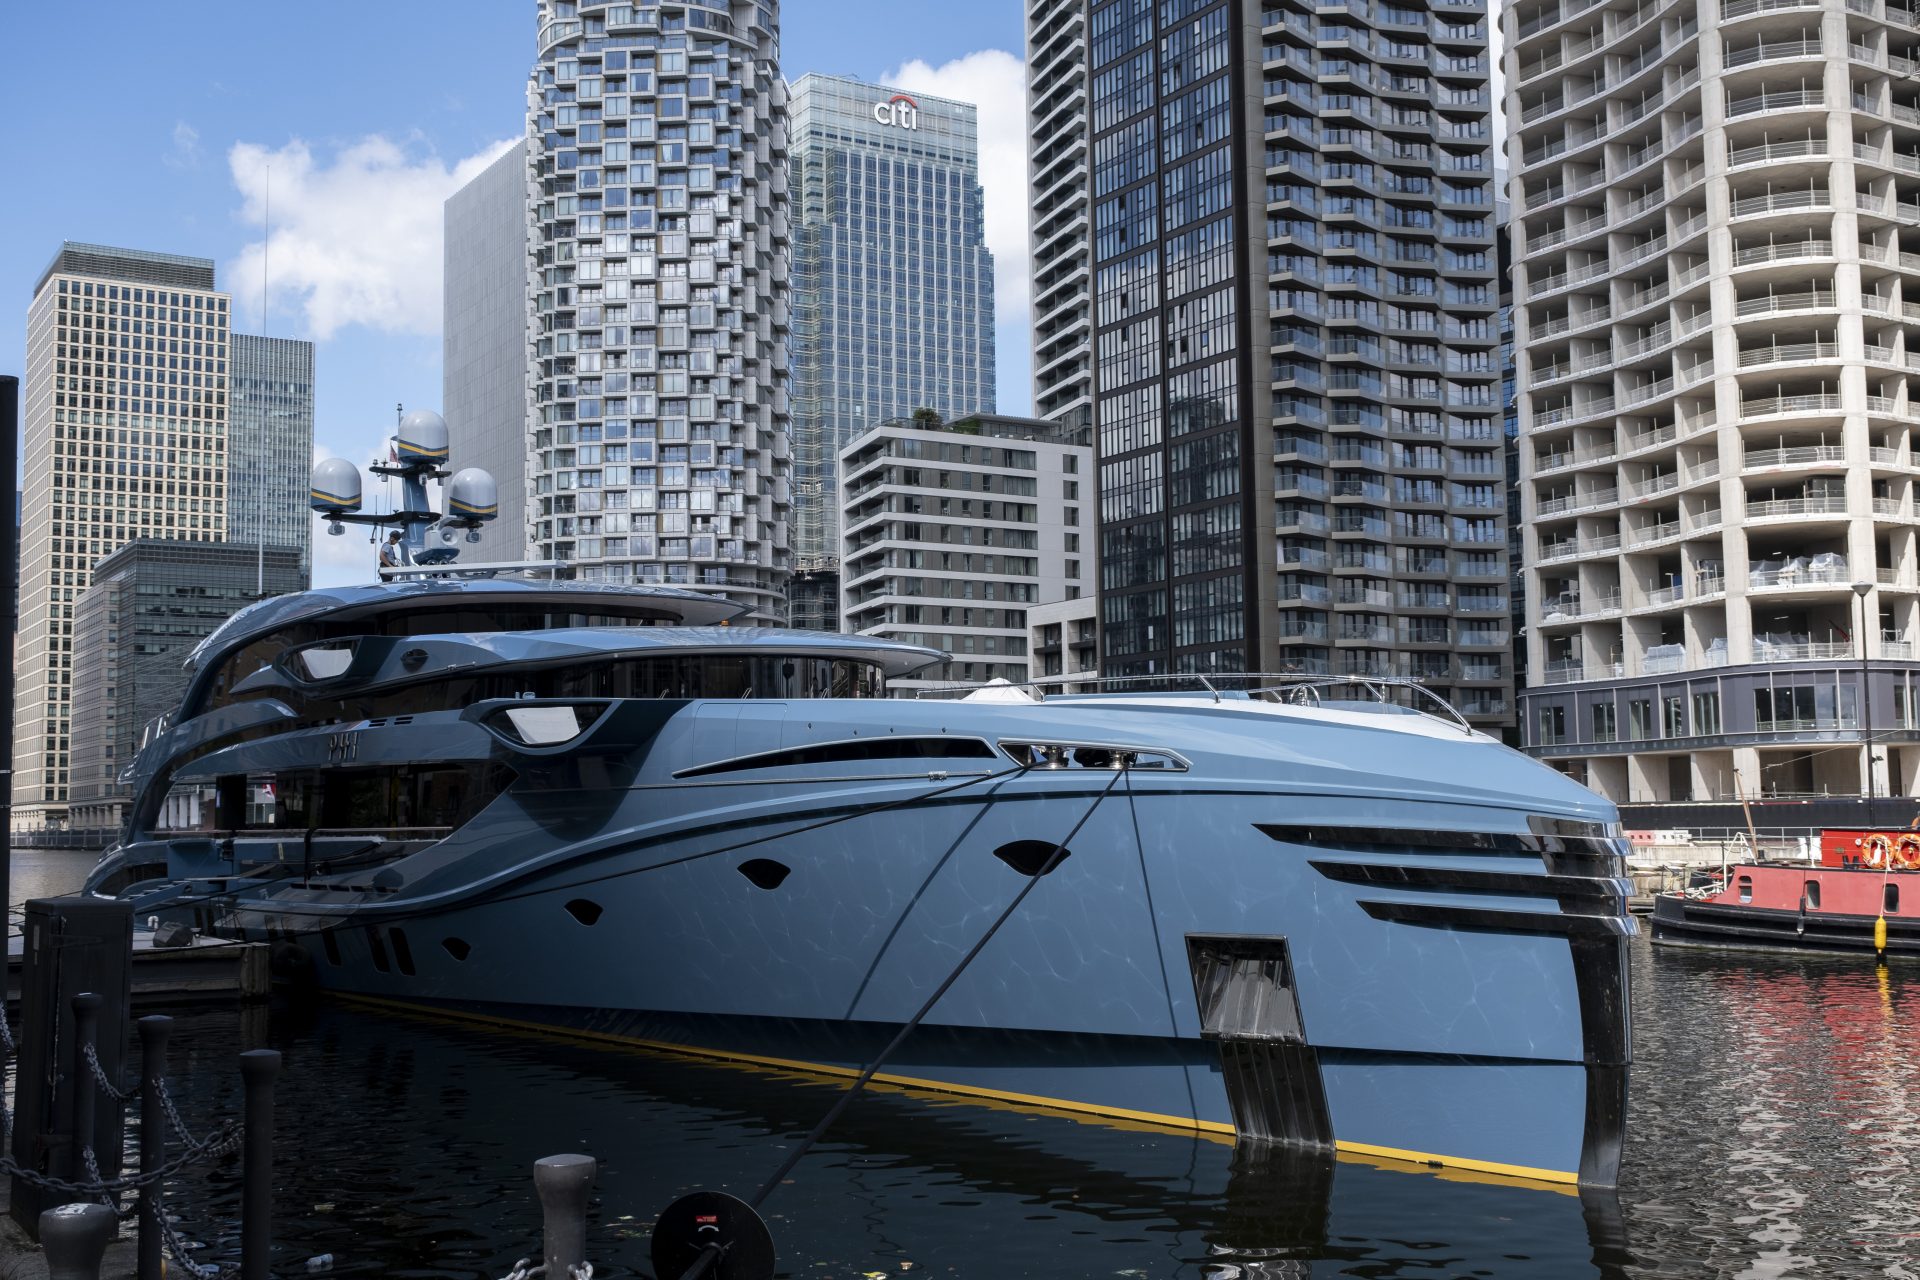 A Russian oligarch sued to get his superyacht back and lost